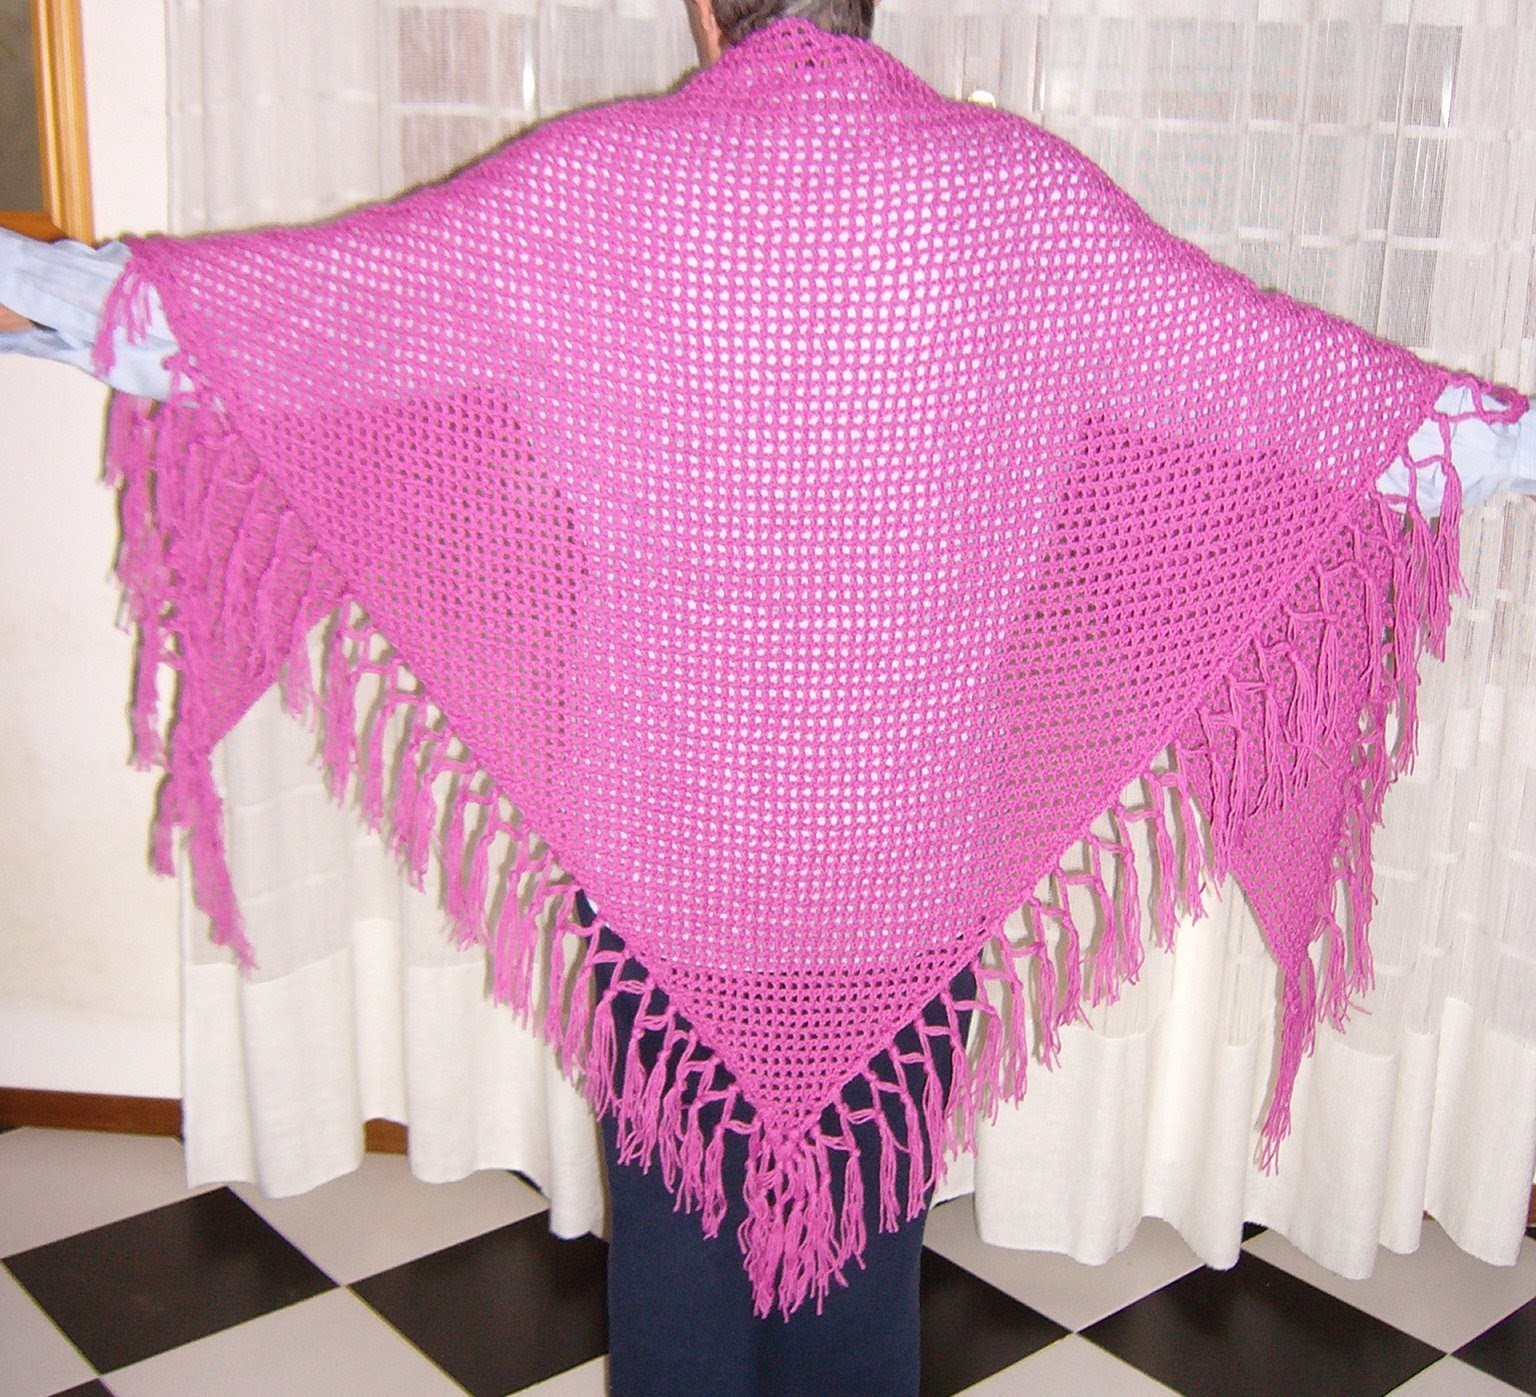 Scialle a filet con frange all'uncinetto - Crochet fringed shawl tutorial (ENG SUB) parte 2.2